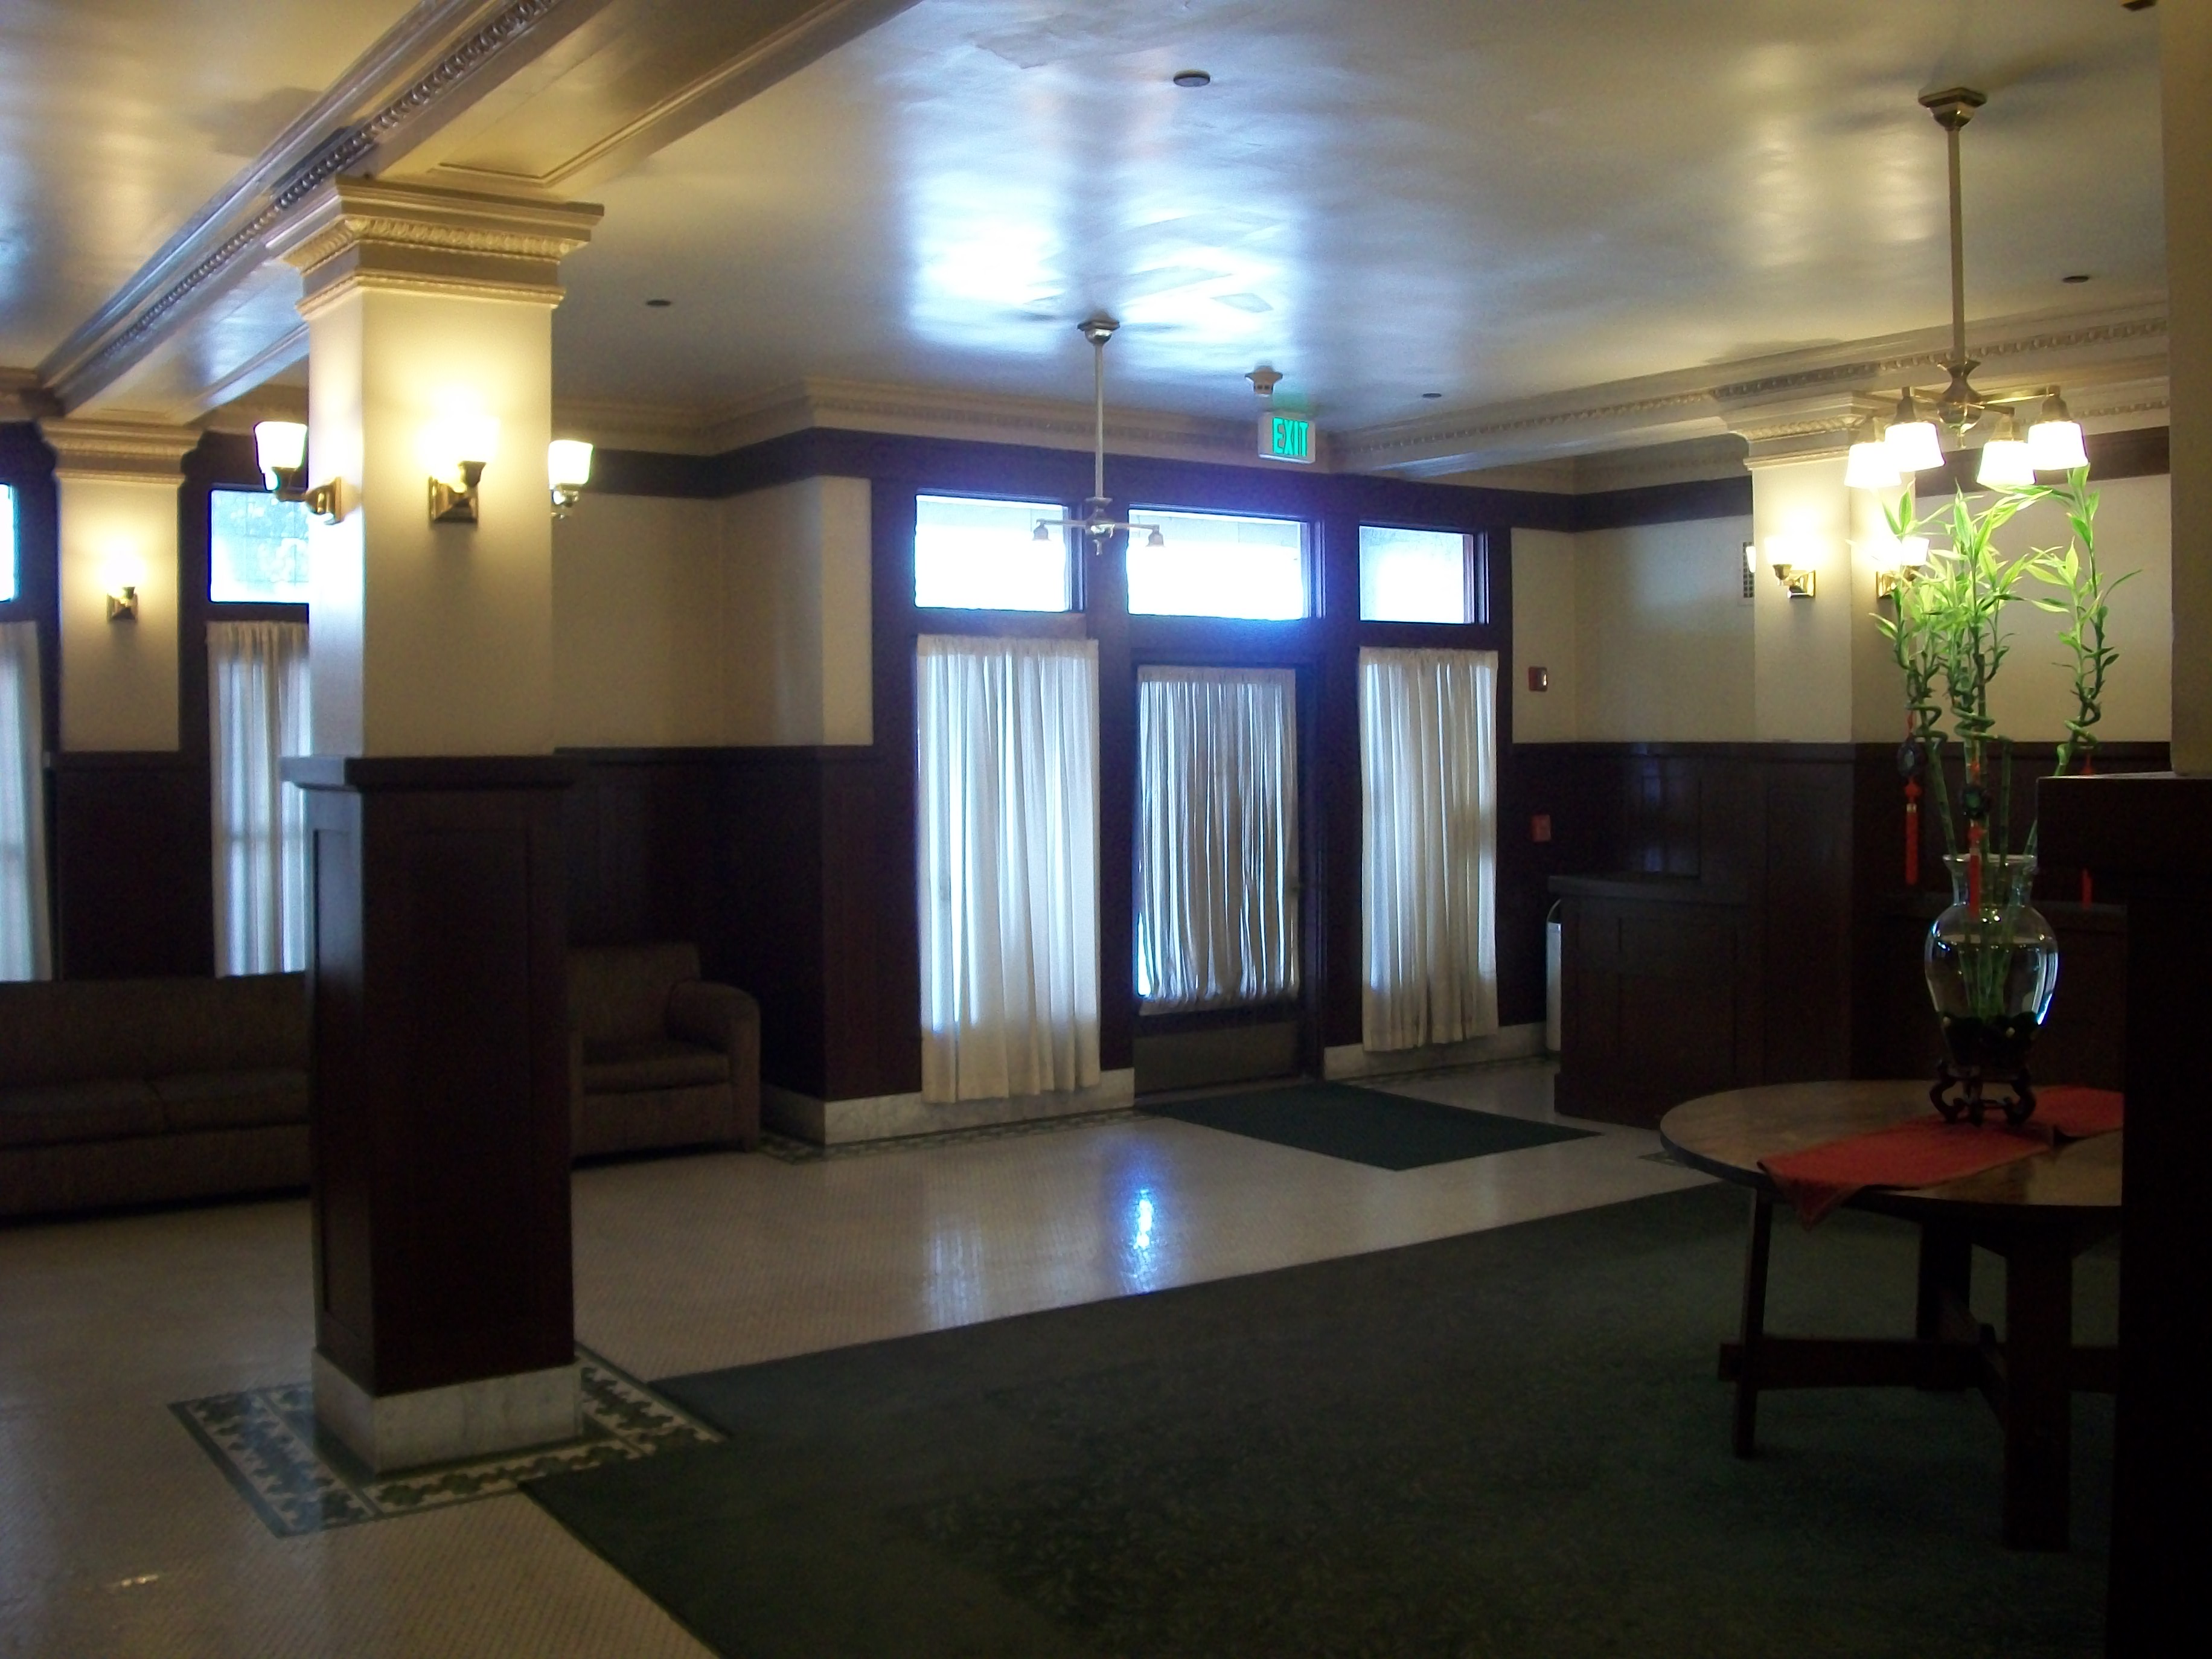 Interior view of the Lobby area of the Young Apartments. Glass door and windows coverd by a thin whitecurtain. White and brown pillar with a carpet in the middle with a table in center